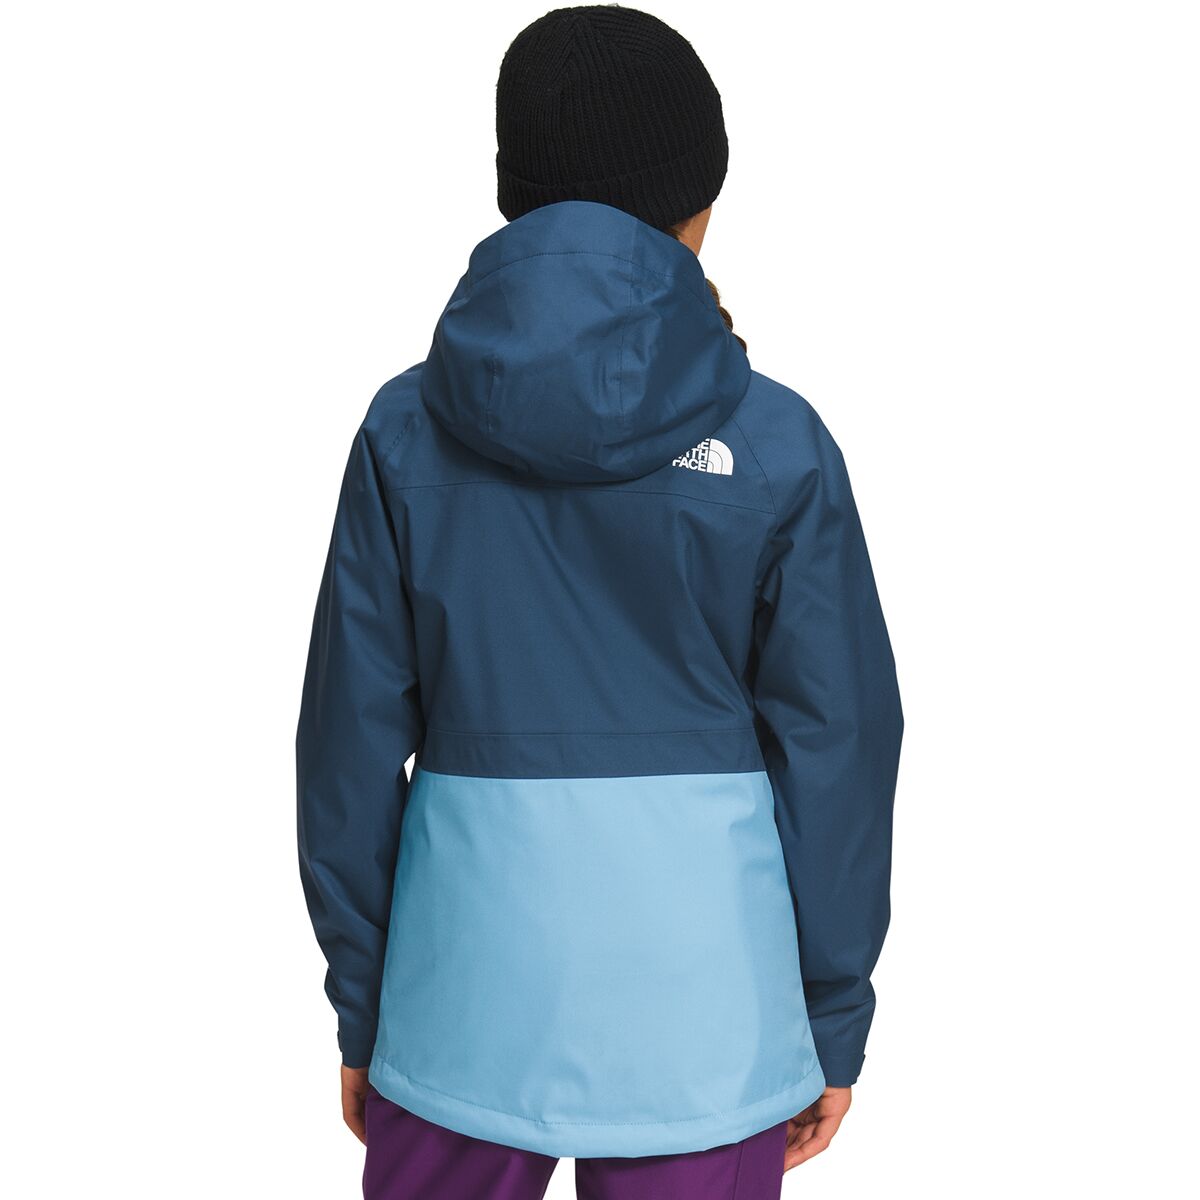 The North Face Vortex Triclimate Jacket - Girls' - Kids